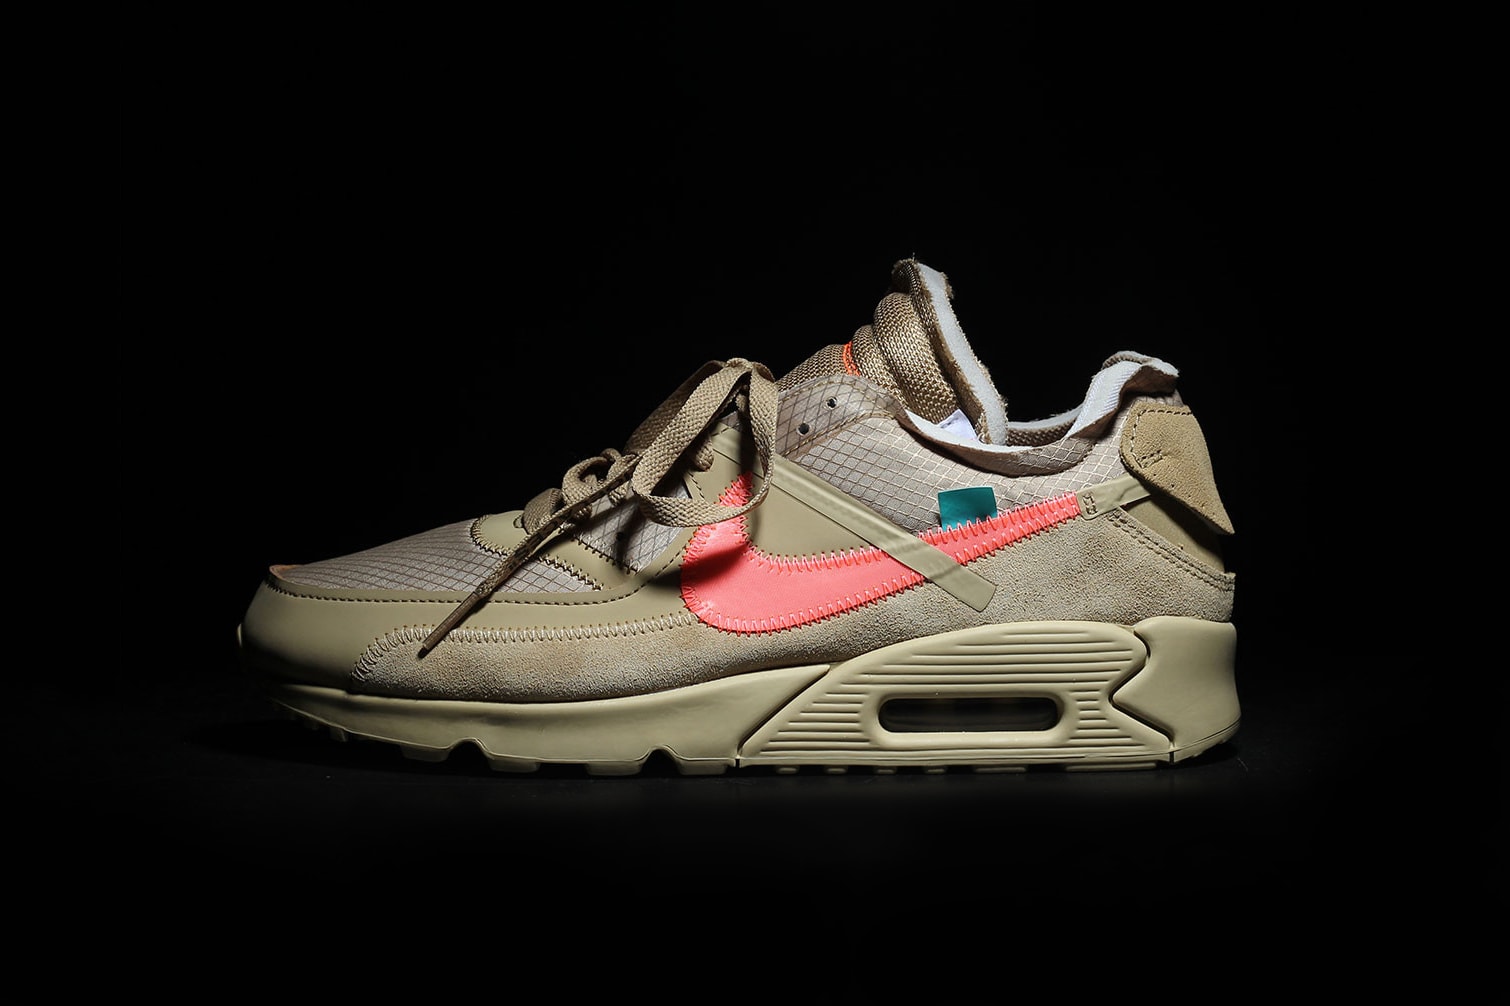 Desert Ore' Off-White x Air Max 90s Releasing Later Than Expected